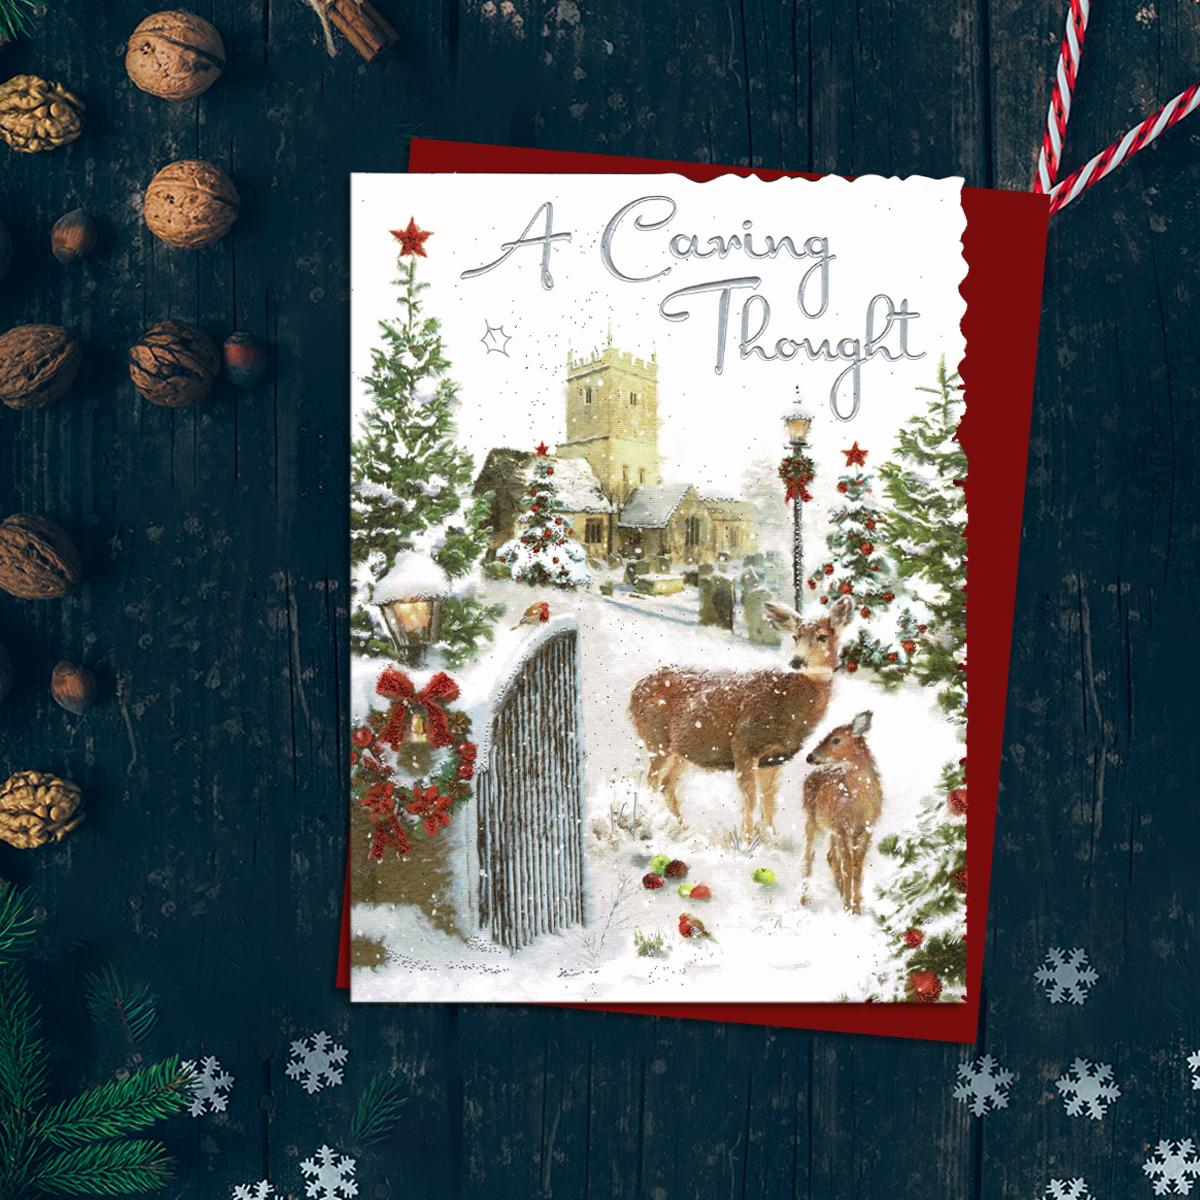 A Caring Thought Featuring A Church With Deer In Snowy Grounds. Finished With Silver Foiled Lettering, Red Glitter Detail And Red Envelope